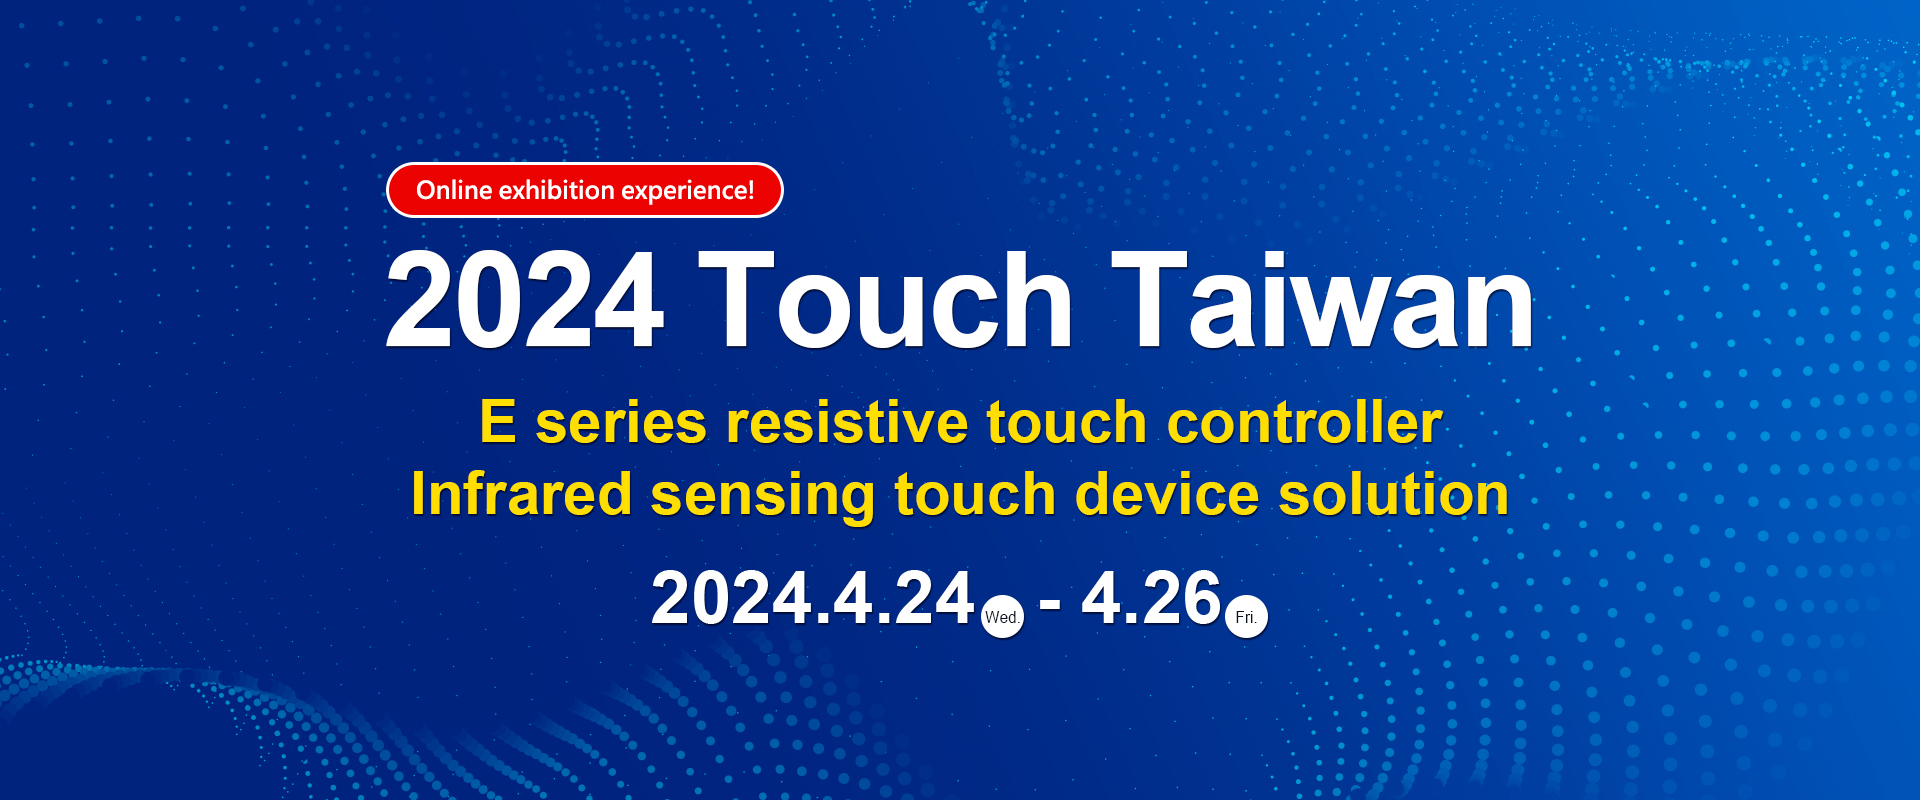 2024 Touch Taiwan